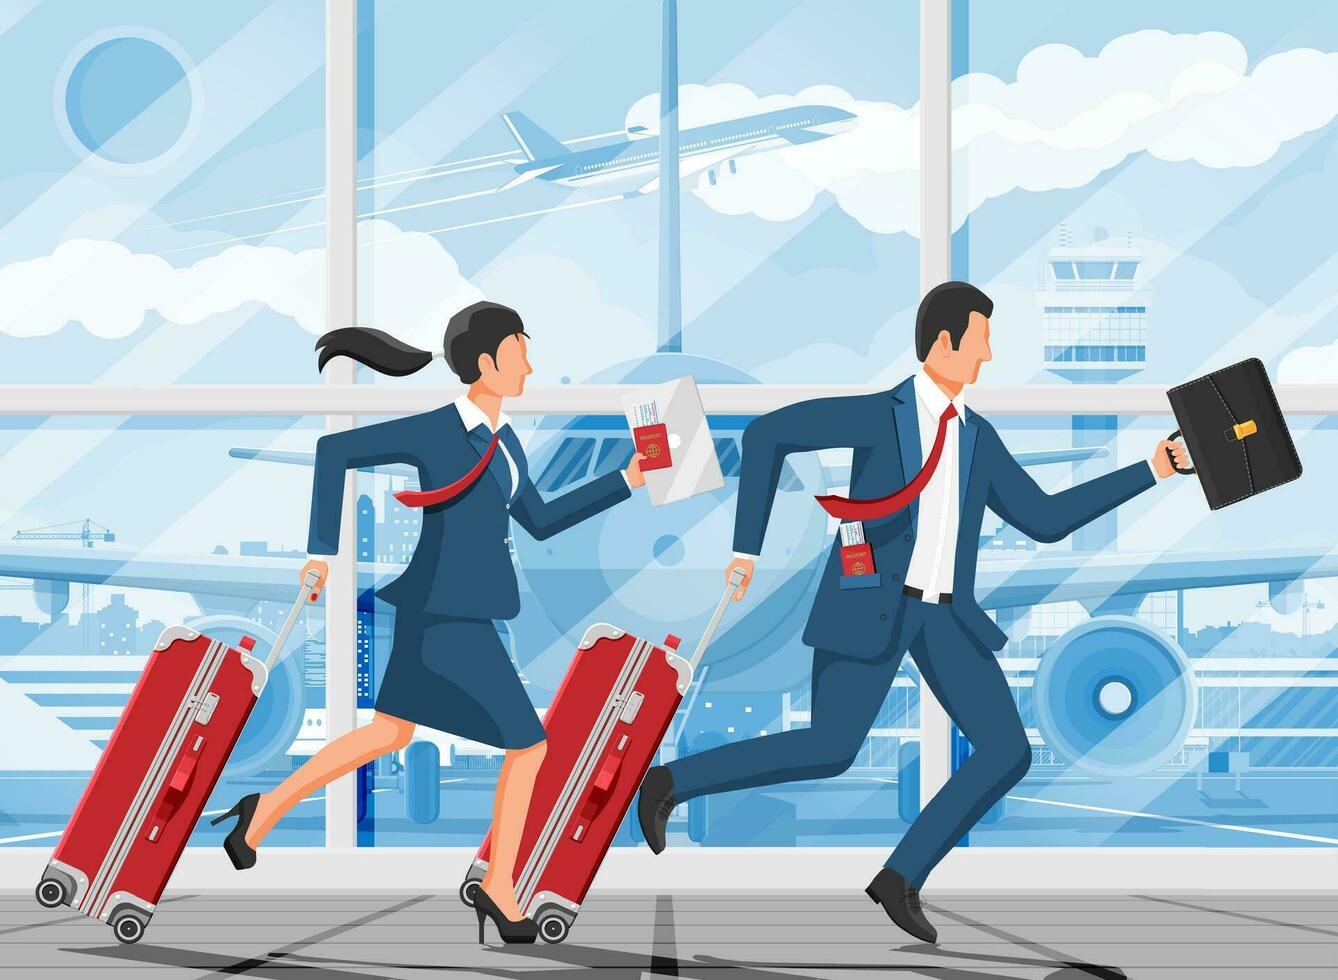 Man with Travel Bag. Tourist with Suitcase, Briefcase, Running to Airport. Businesswoman with Luggage. Business Man with Baggage. Business Flight. Airfield with Airplane. Flat Vector Illustration